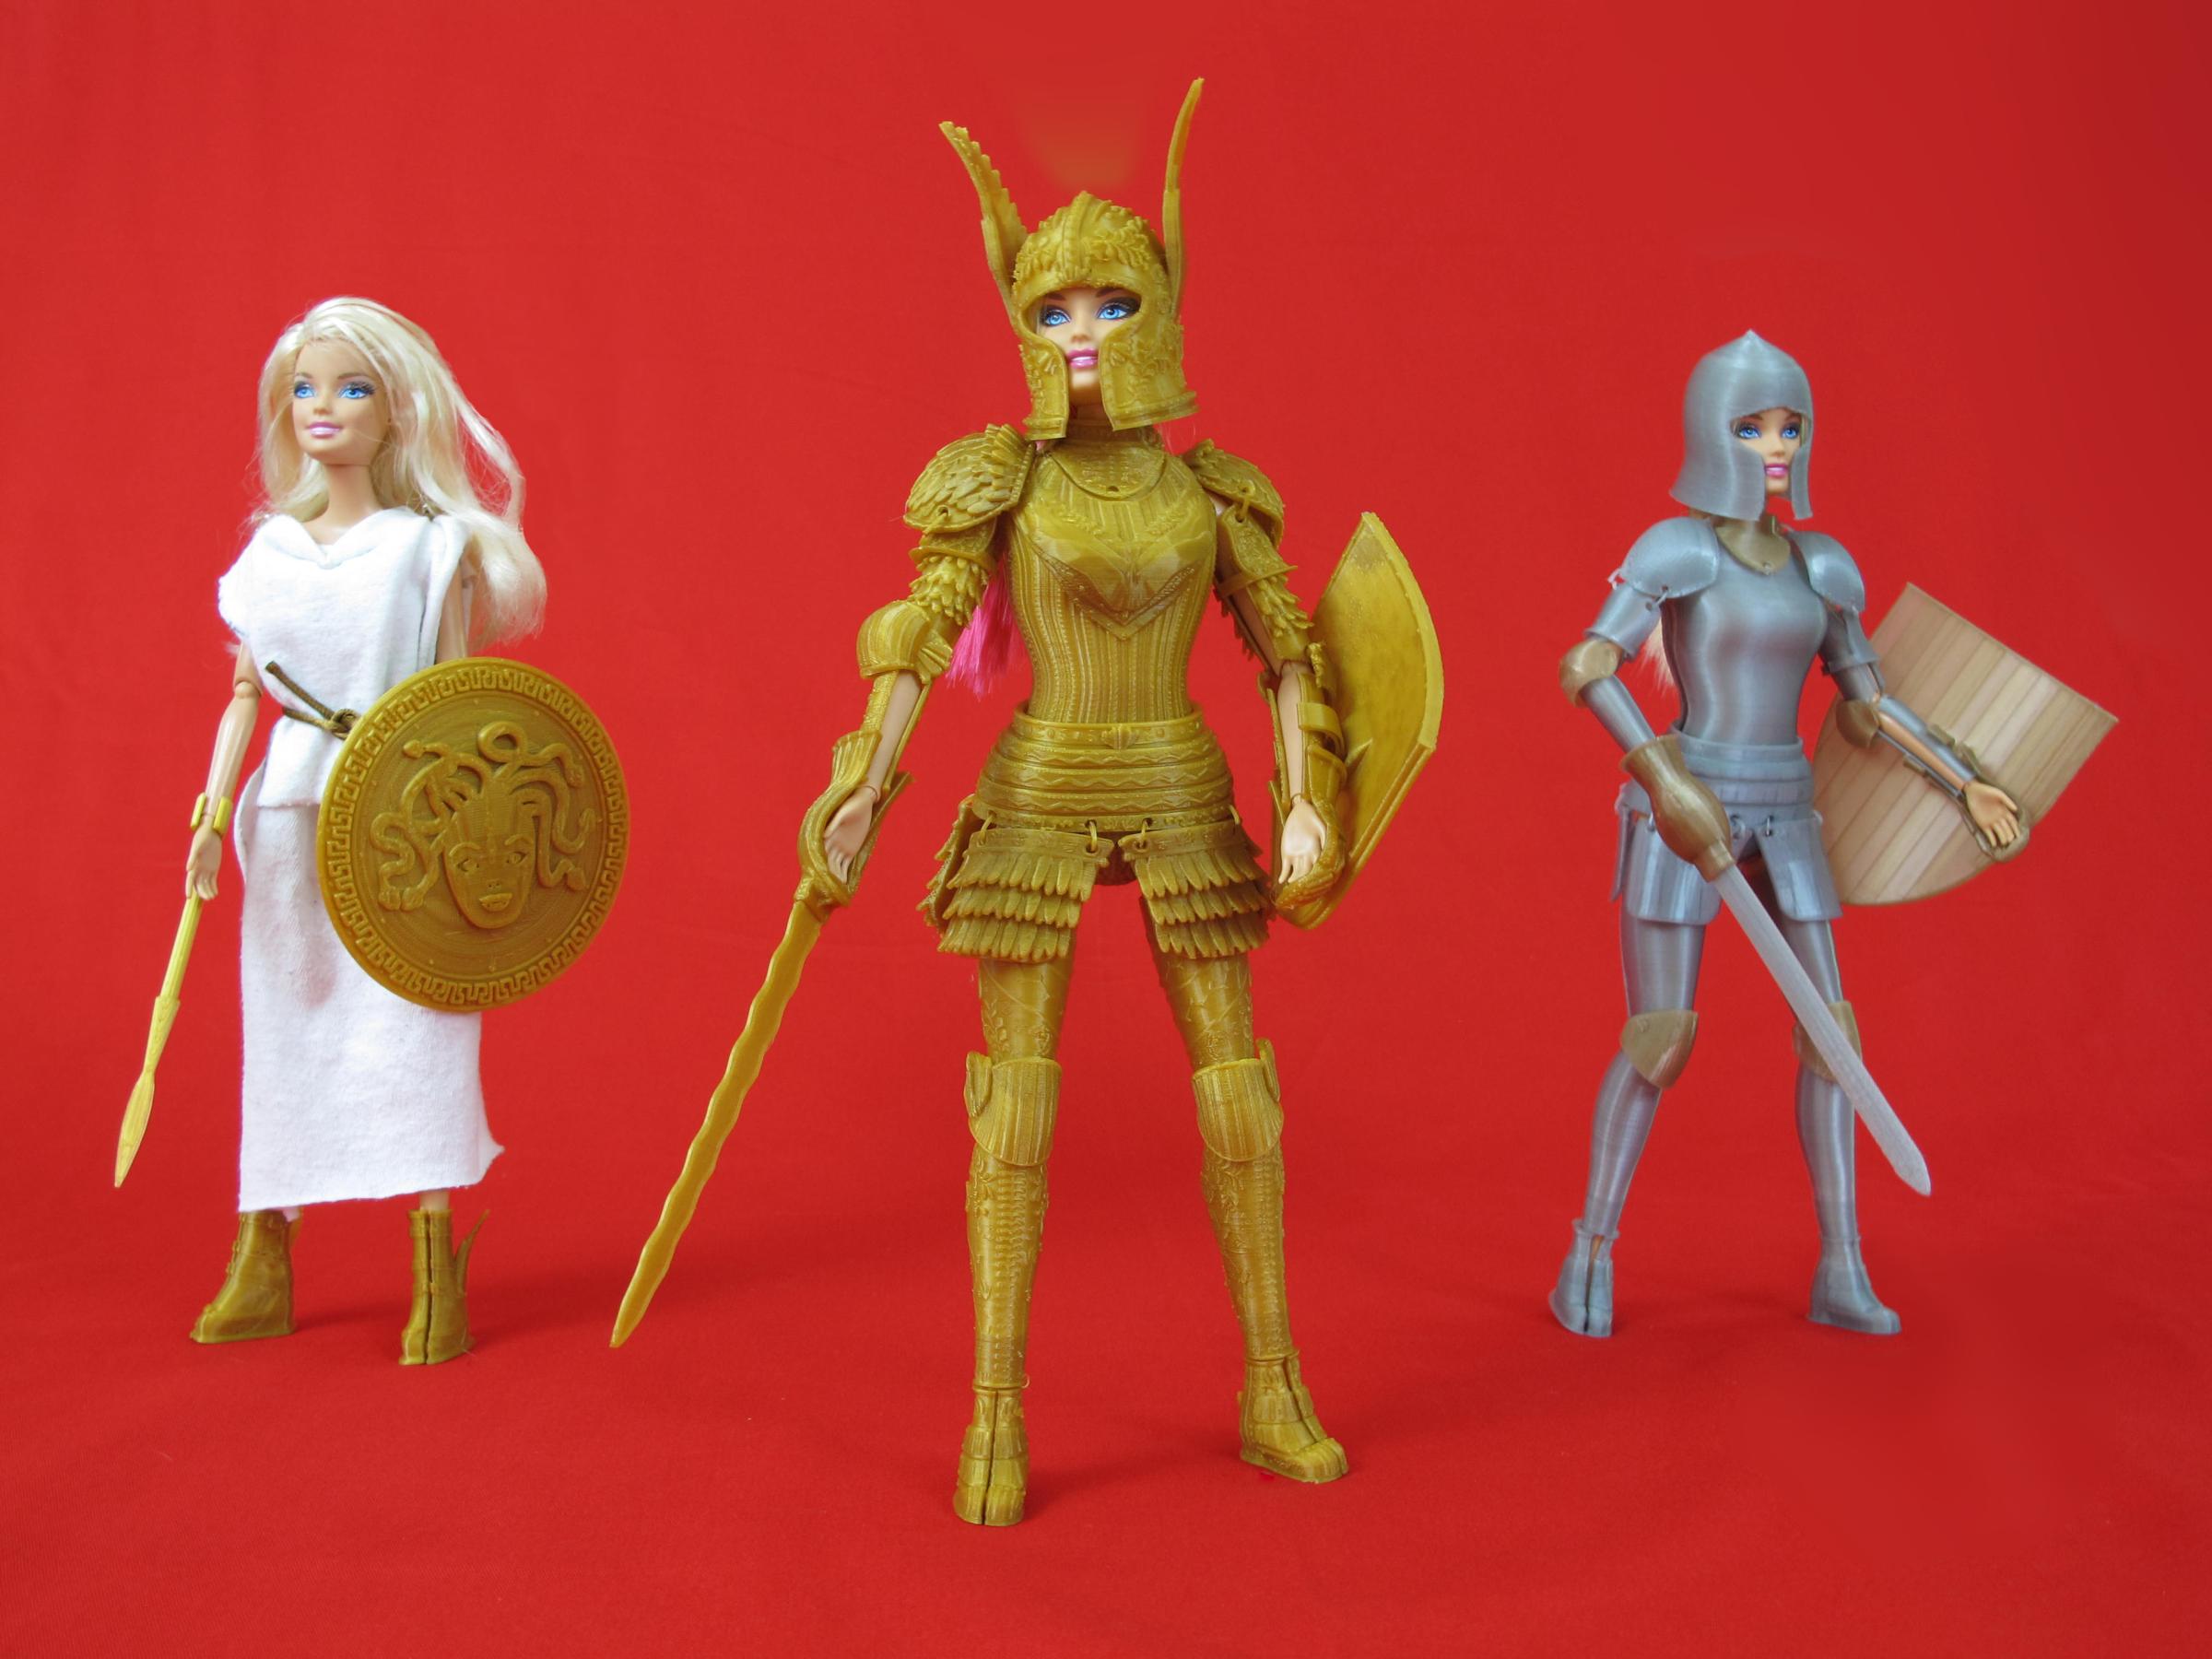 The three Barbie outfits in Rodda's "Faire Play Battle Set".